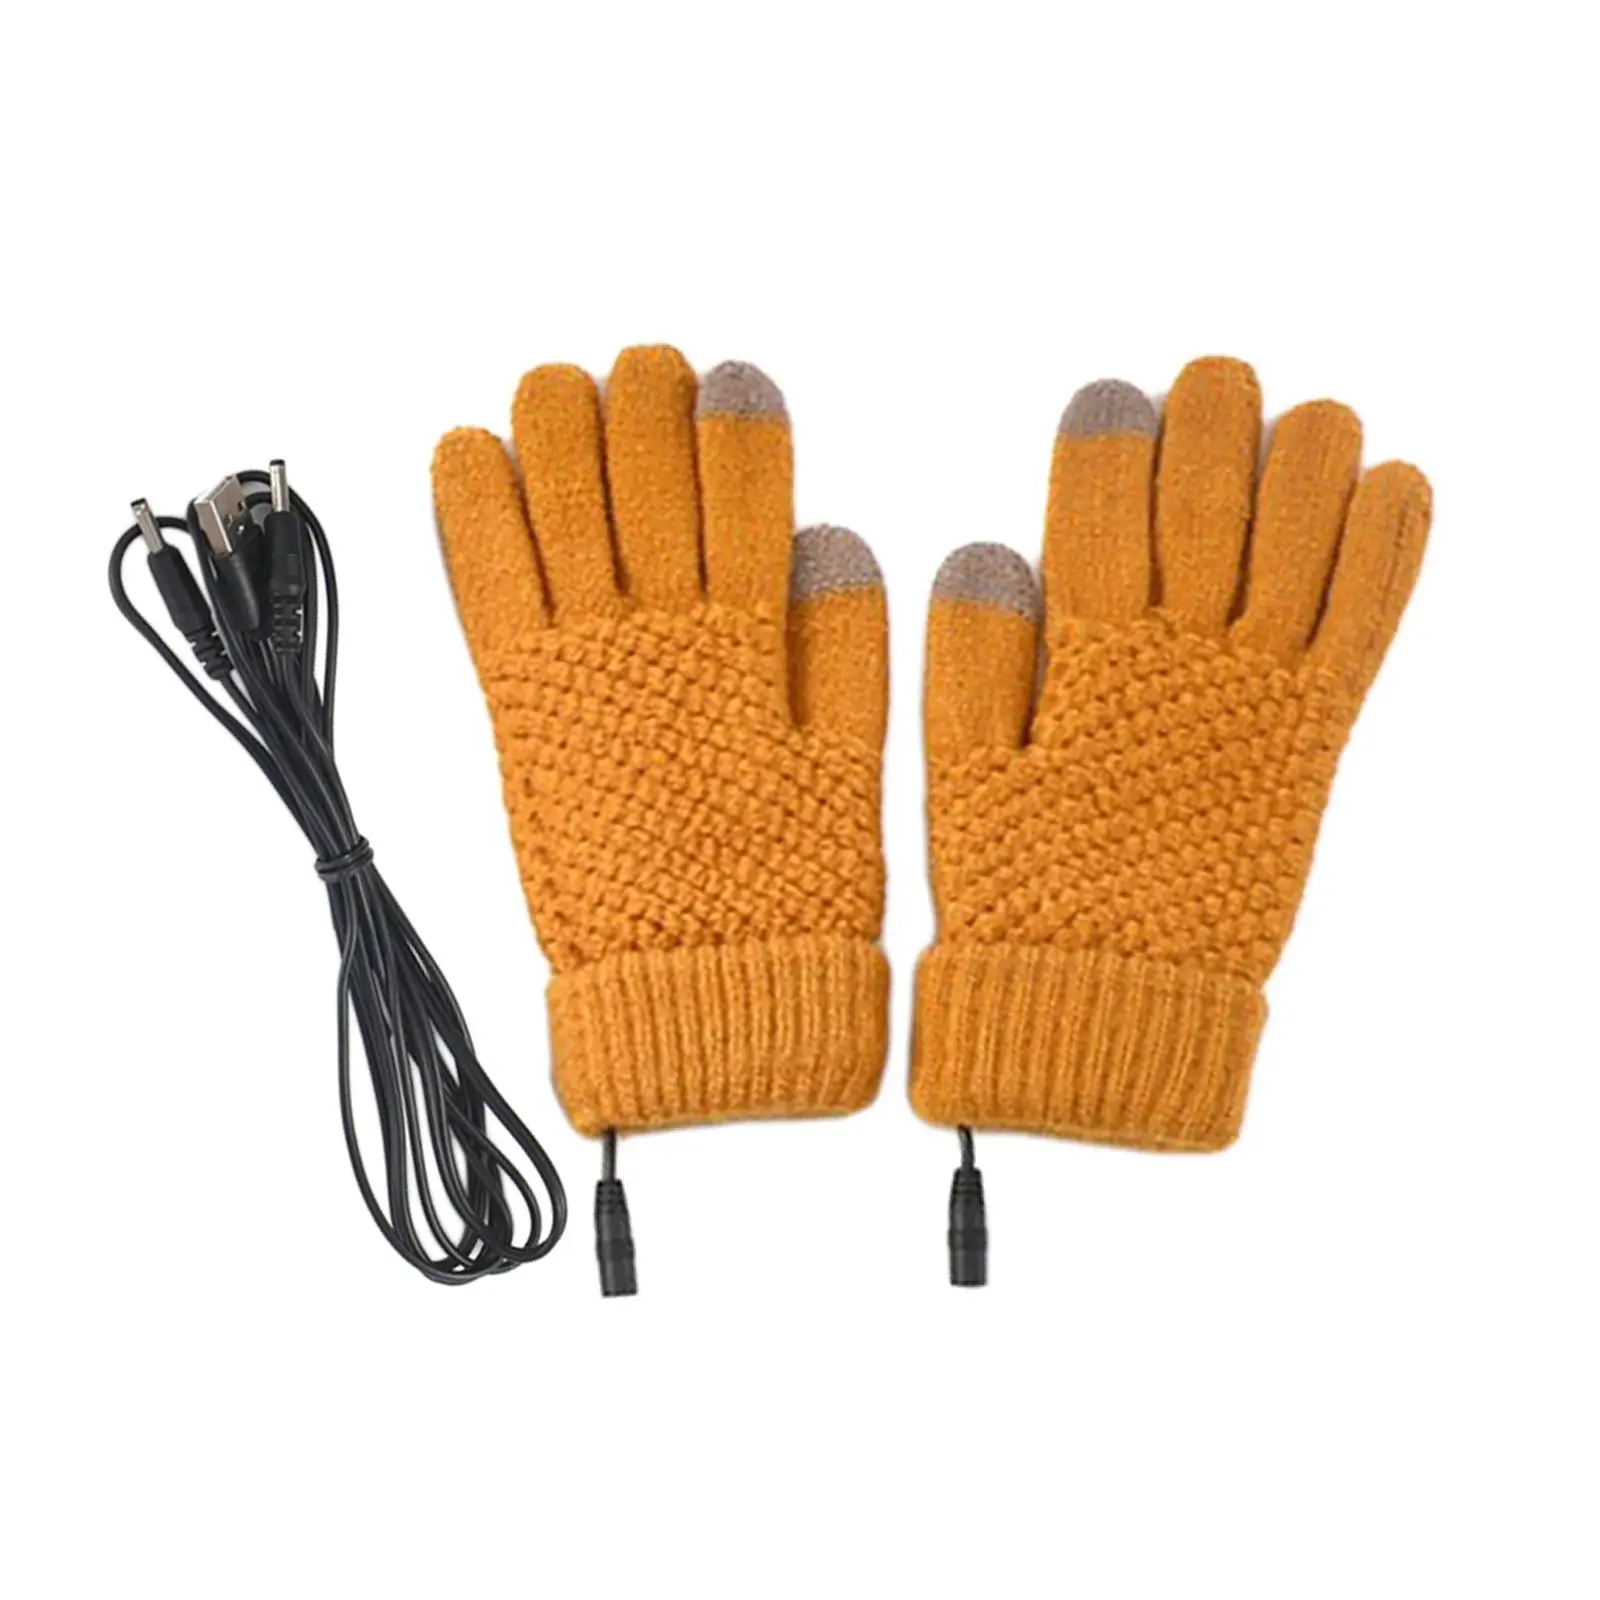 USB Heated Gloves Connected to Laptop Adapter for Warm Electric Warm Gloves for Hiking Camping Cycling Outdoor Winter Gift